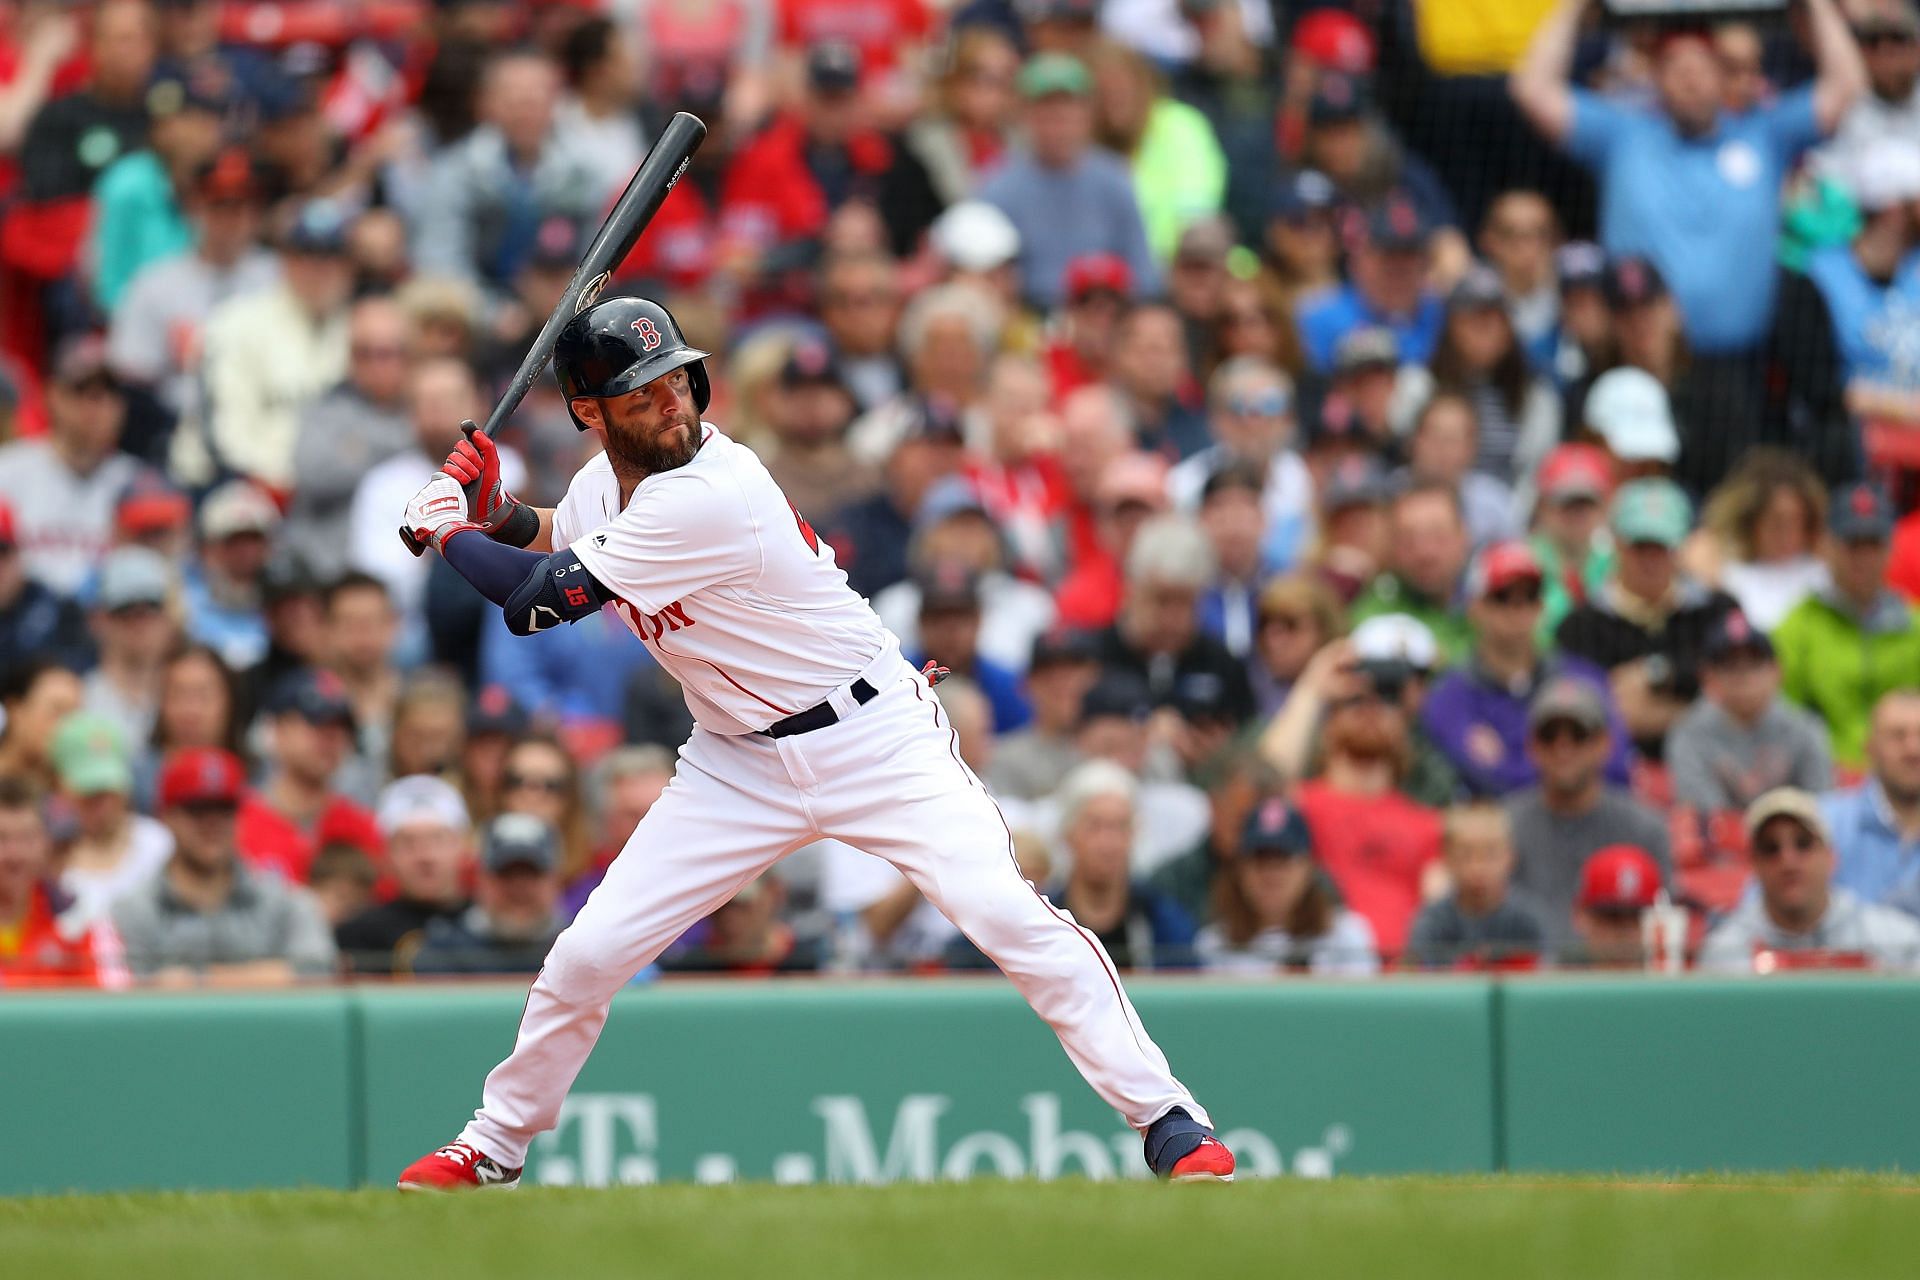 Dustin Pedroia of the Boston Red Sox at bat during the third inning against the Baltimore Orioles at Fenway Park on April 15, 2019